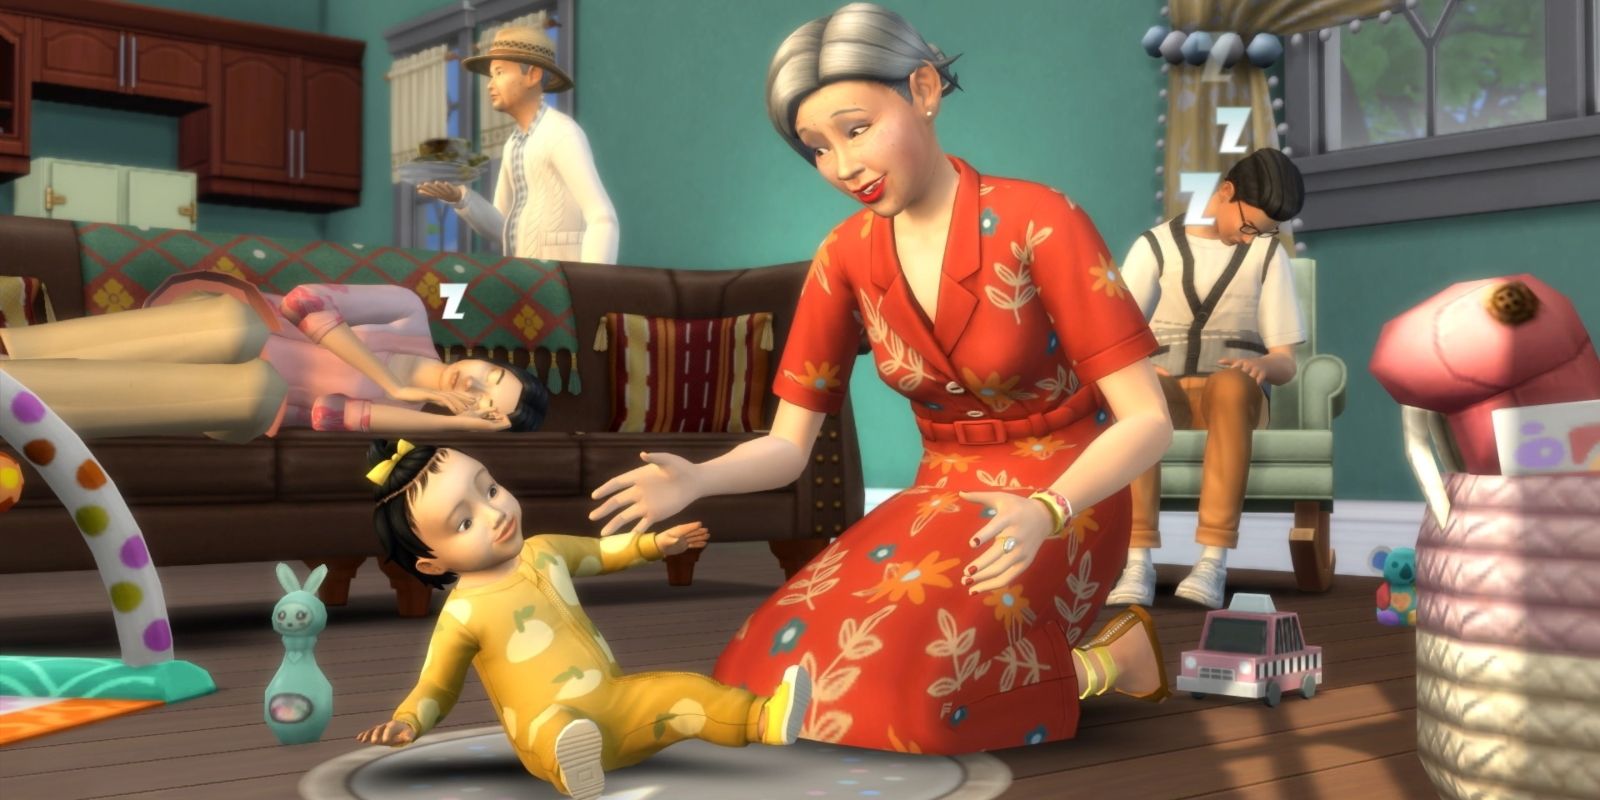 An elder Sim caring for an infant who is learning to sit up